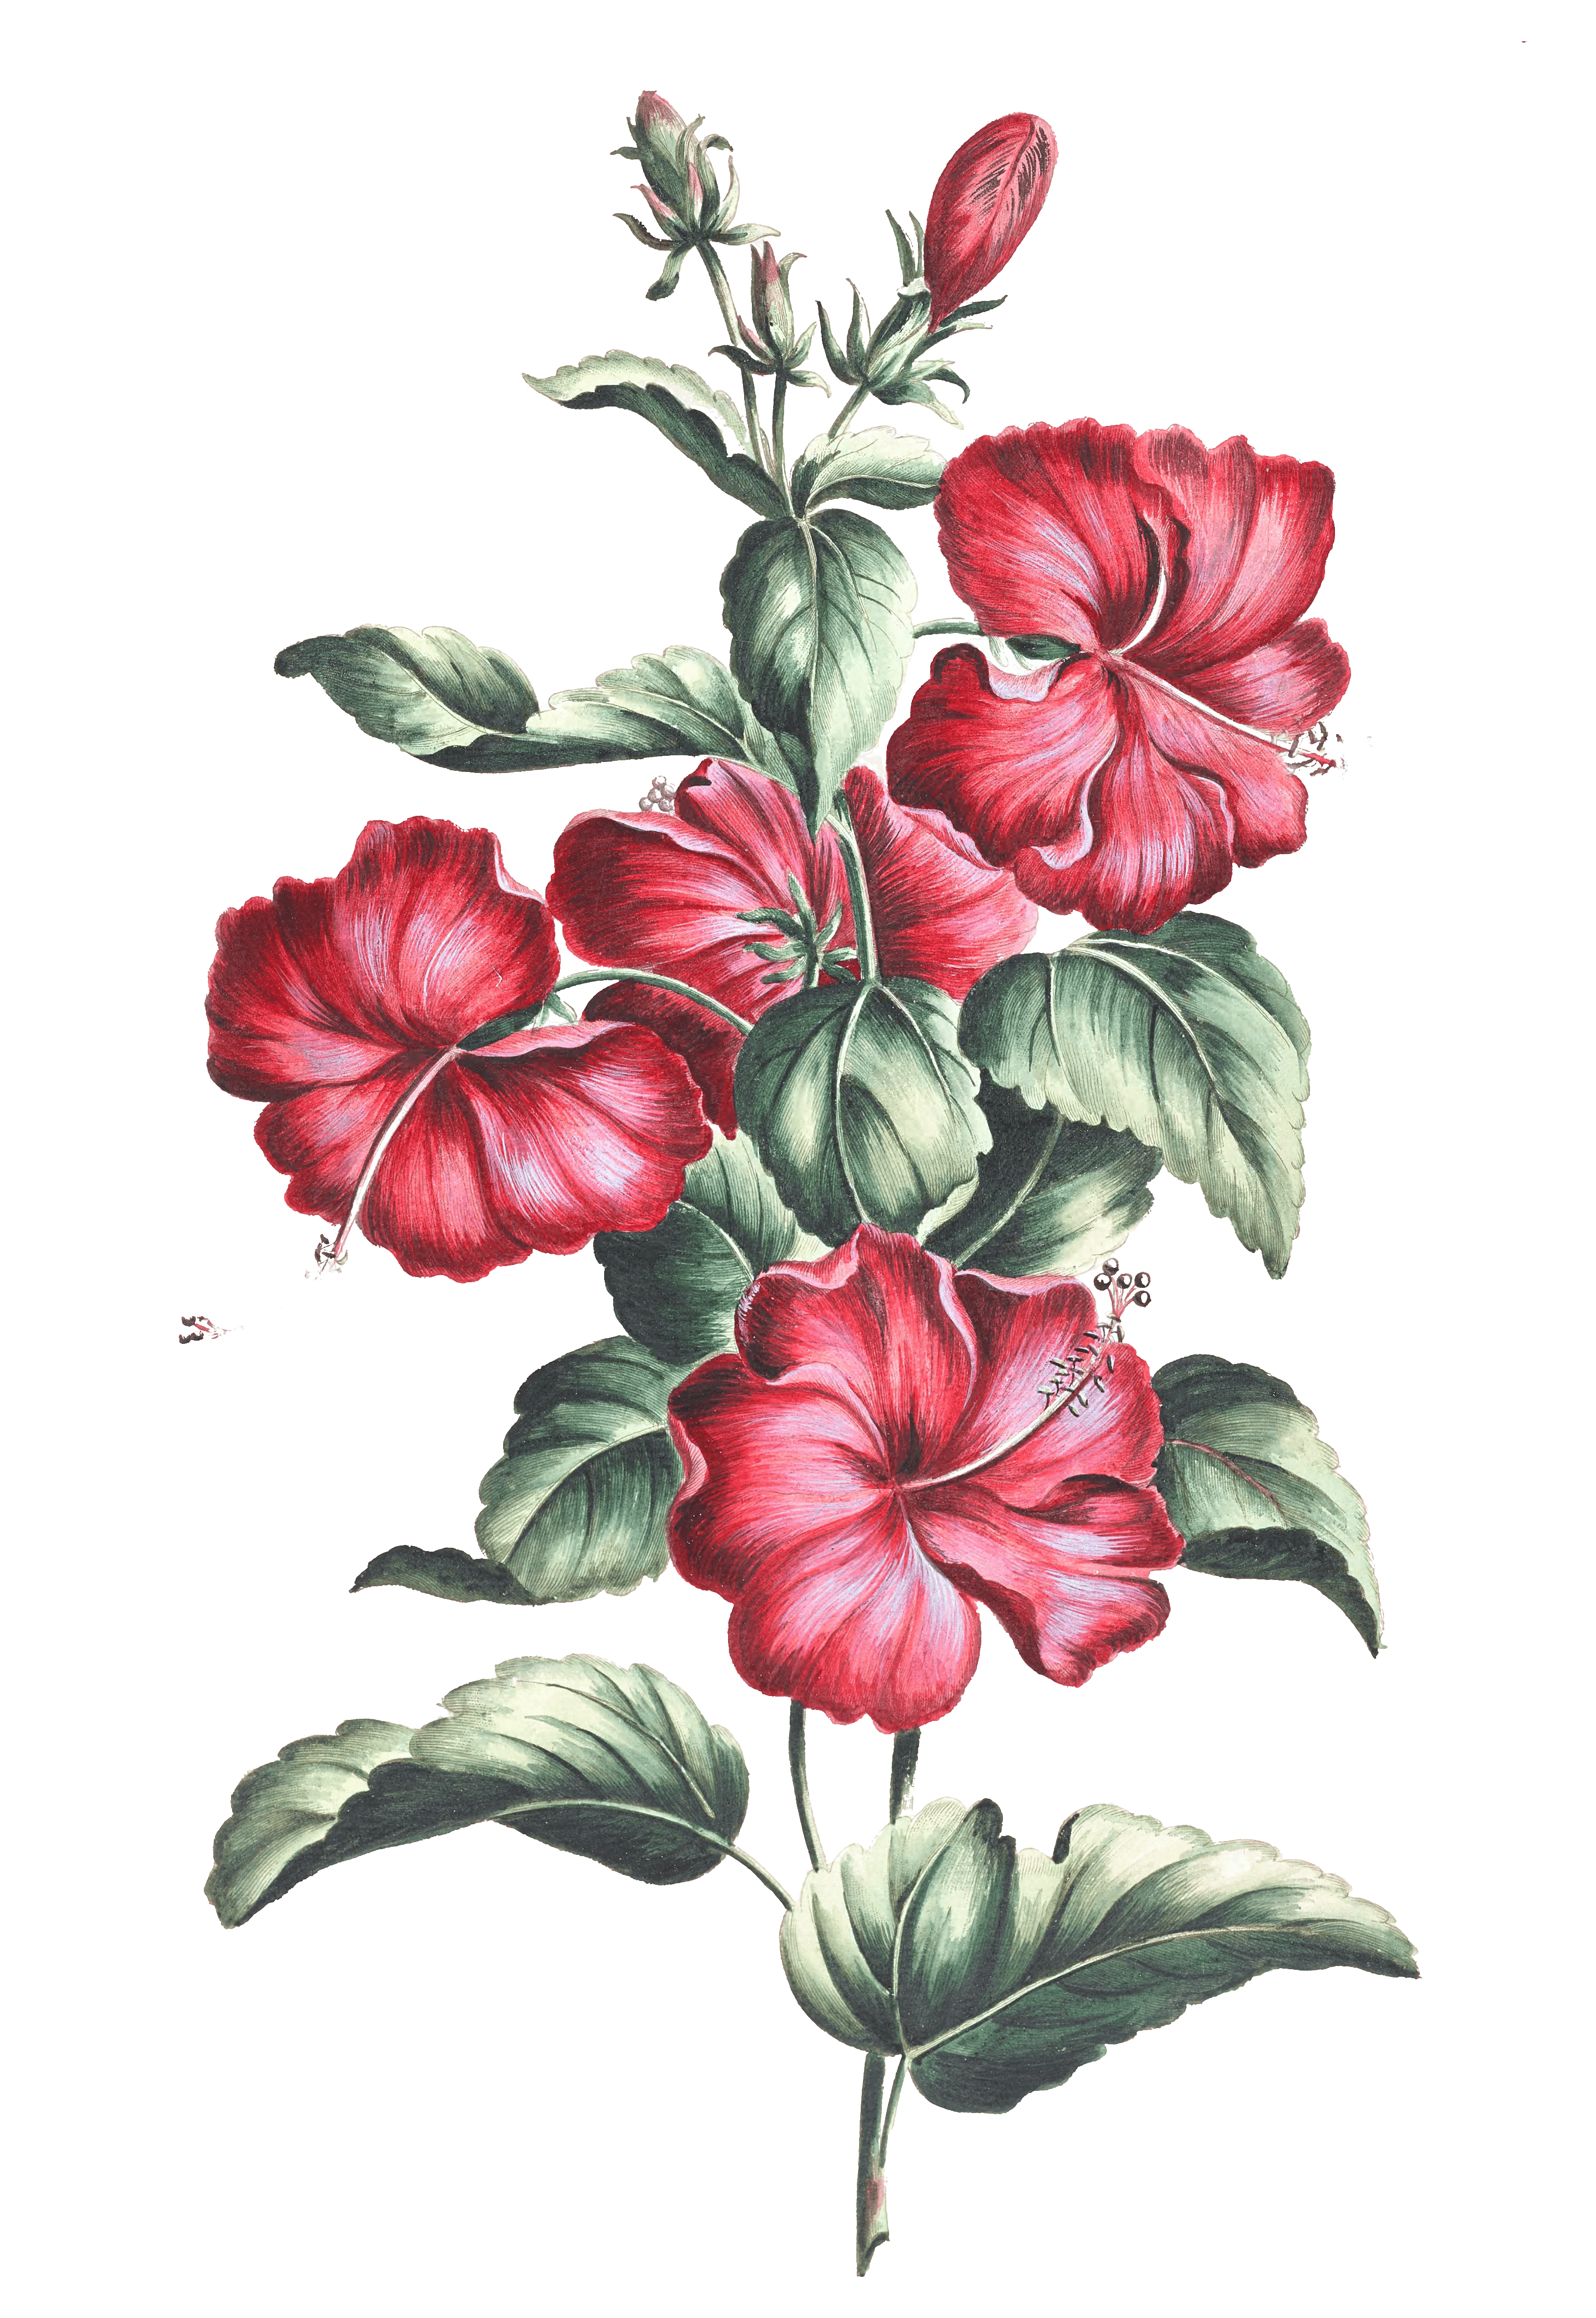 Red hibiscus, A flower again, instead of an animal. Classic…